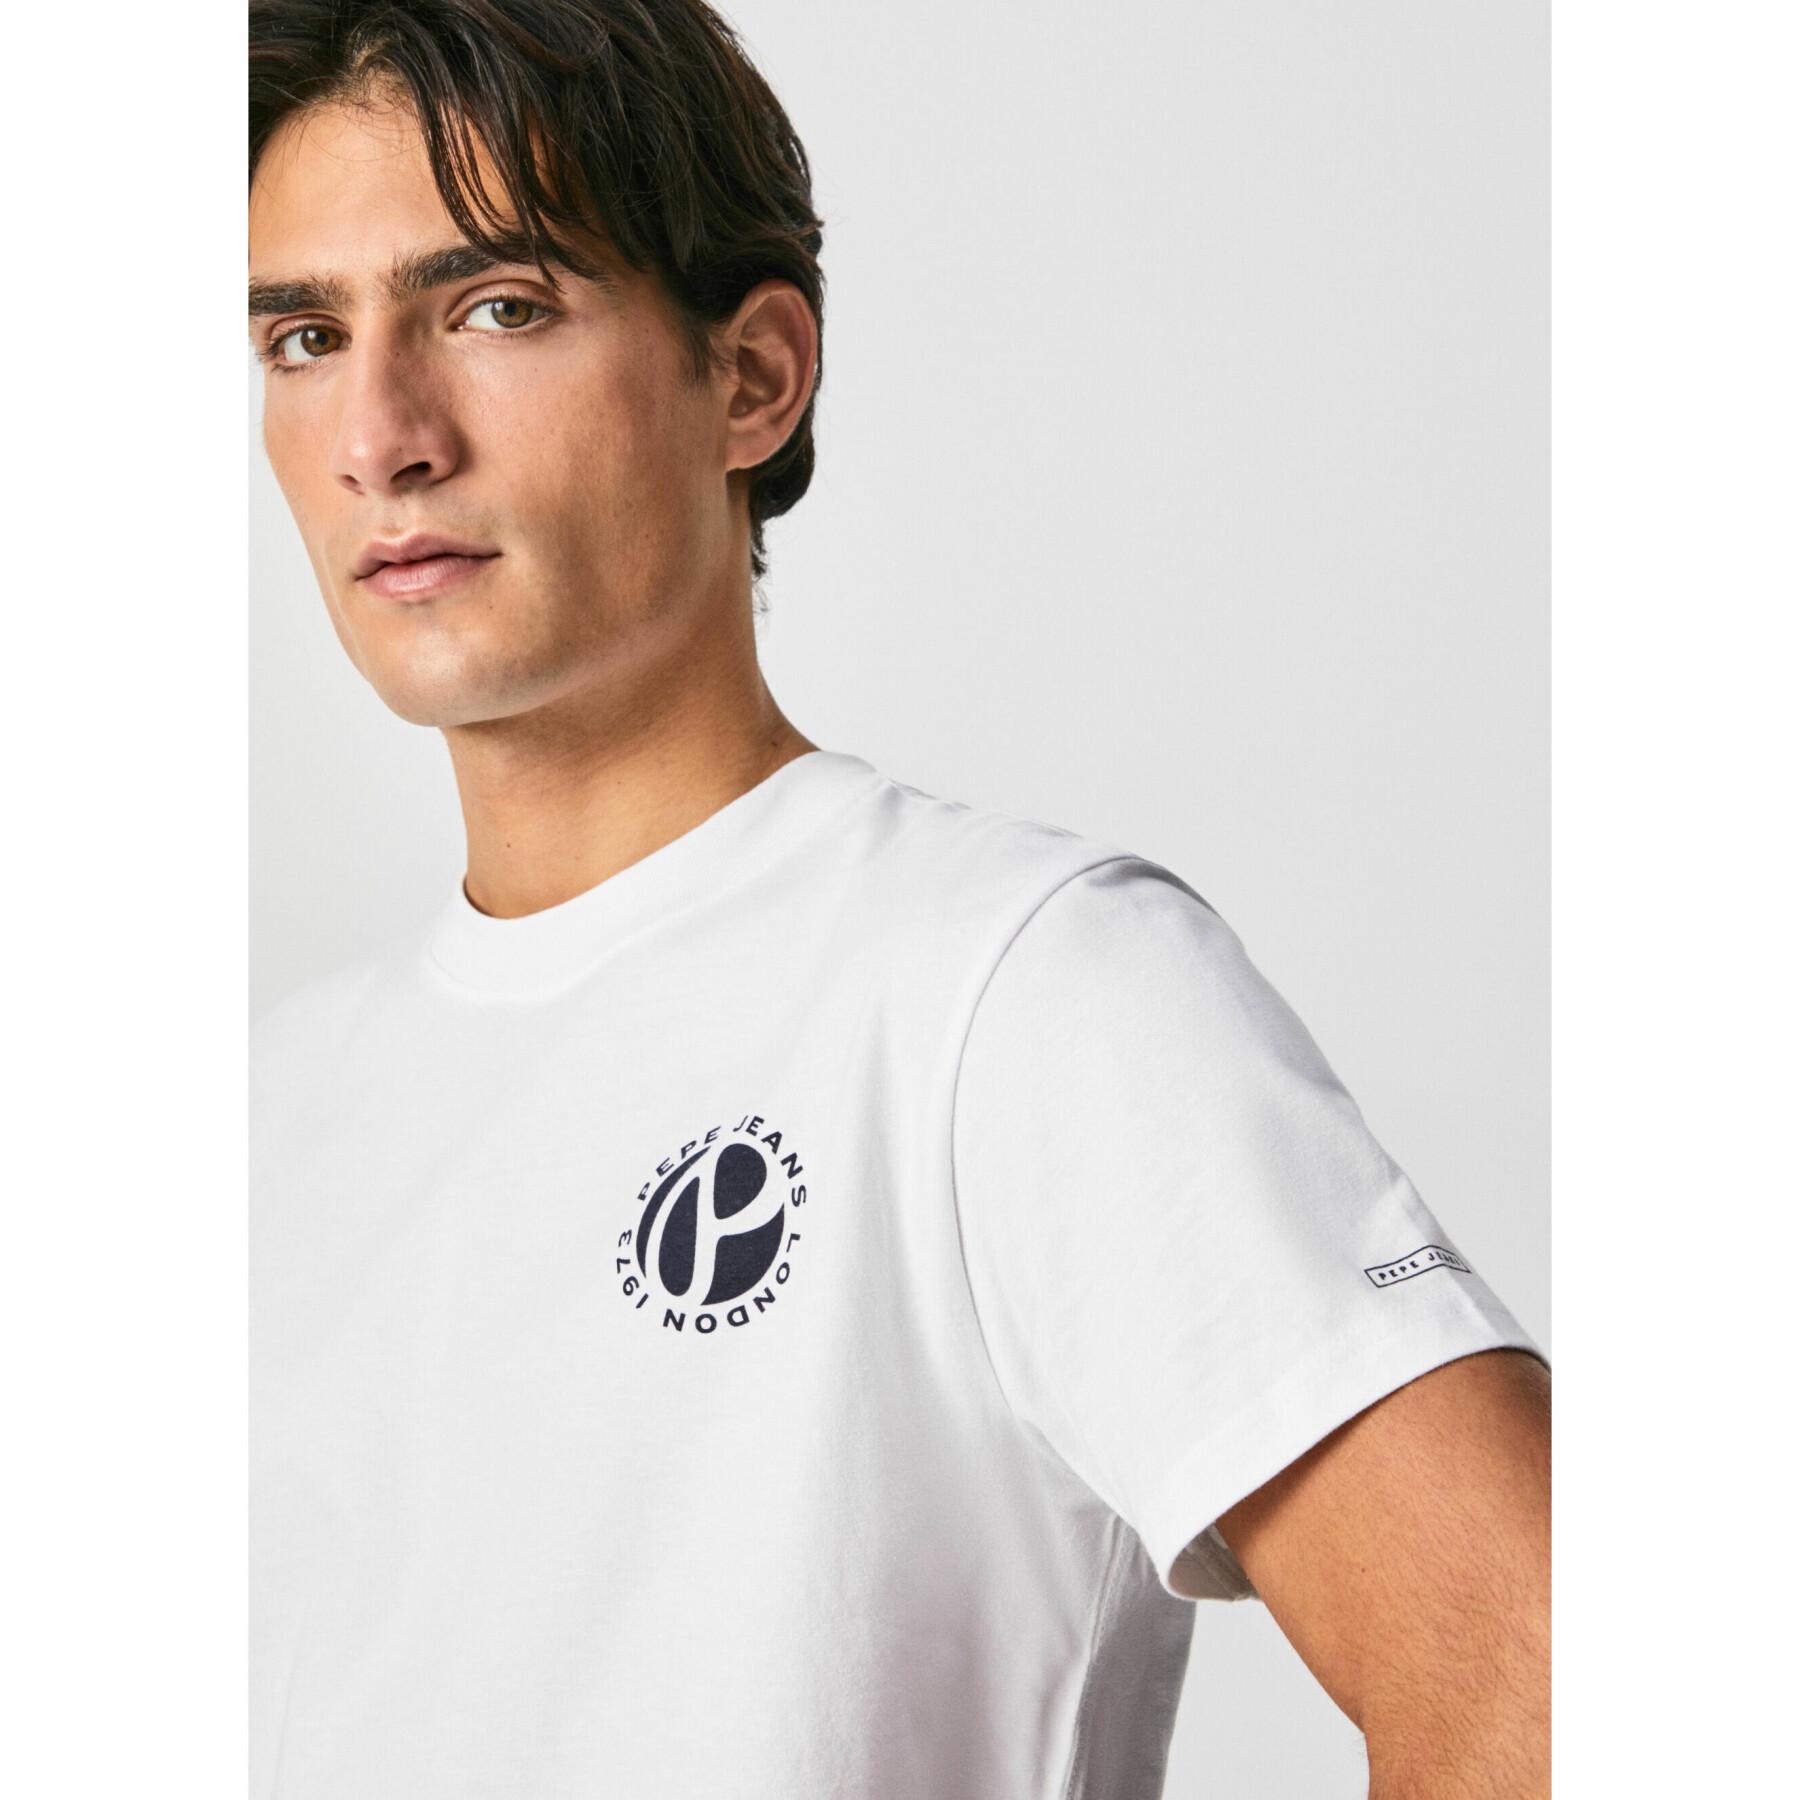 T-Shirt Pepe Jeans 